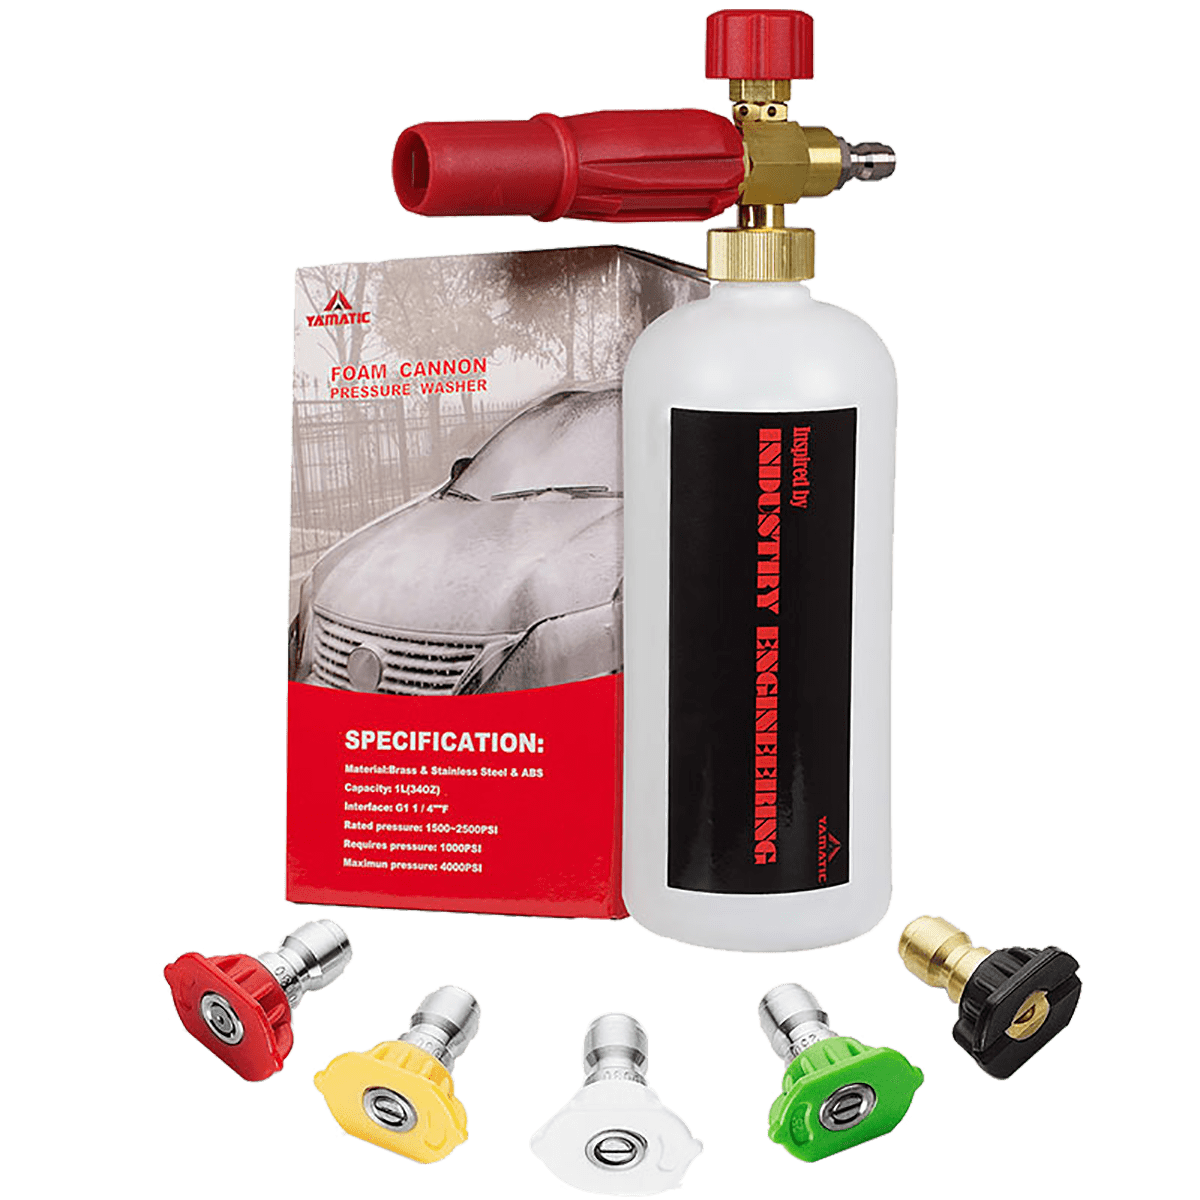 Foam Cannon Pressure Washer with 5 Nozzle – YAMATIC®